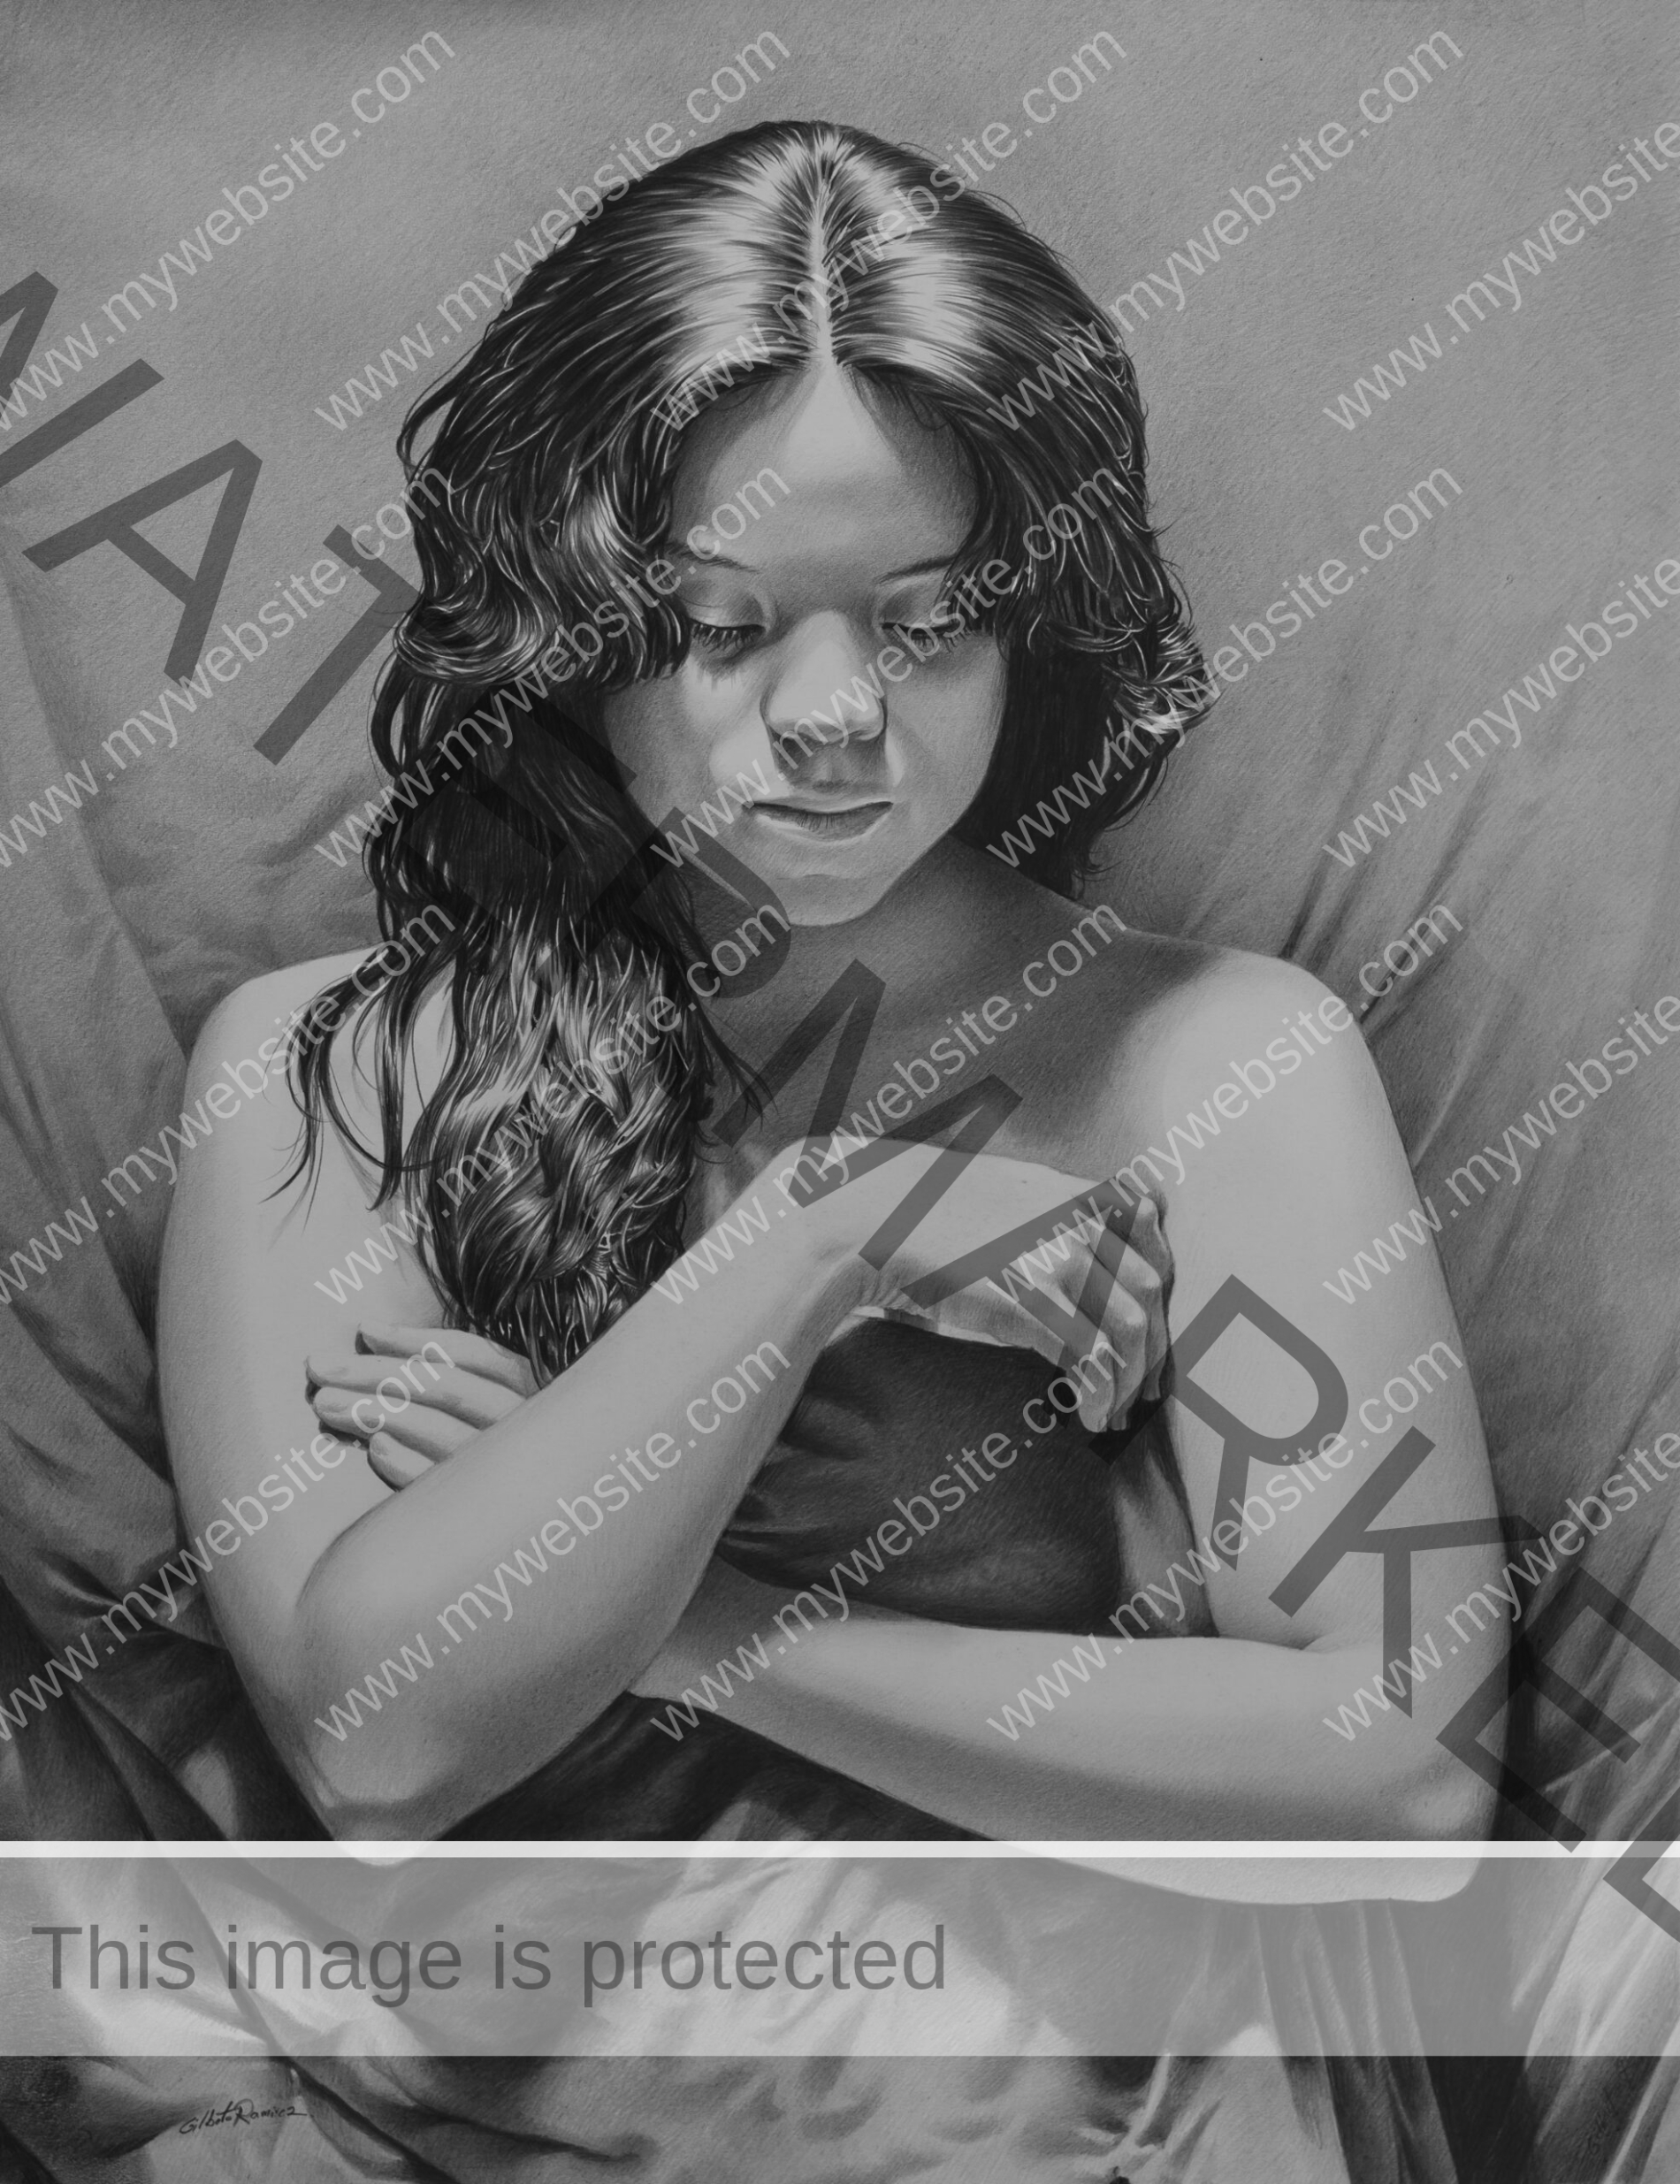 graphite drawing of a Costa Rican girl sleeping in bed with sheets pulled up. intimate graphite drawing